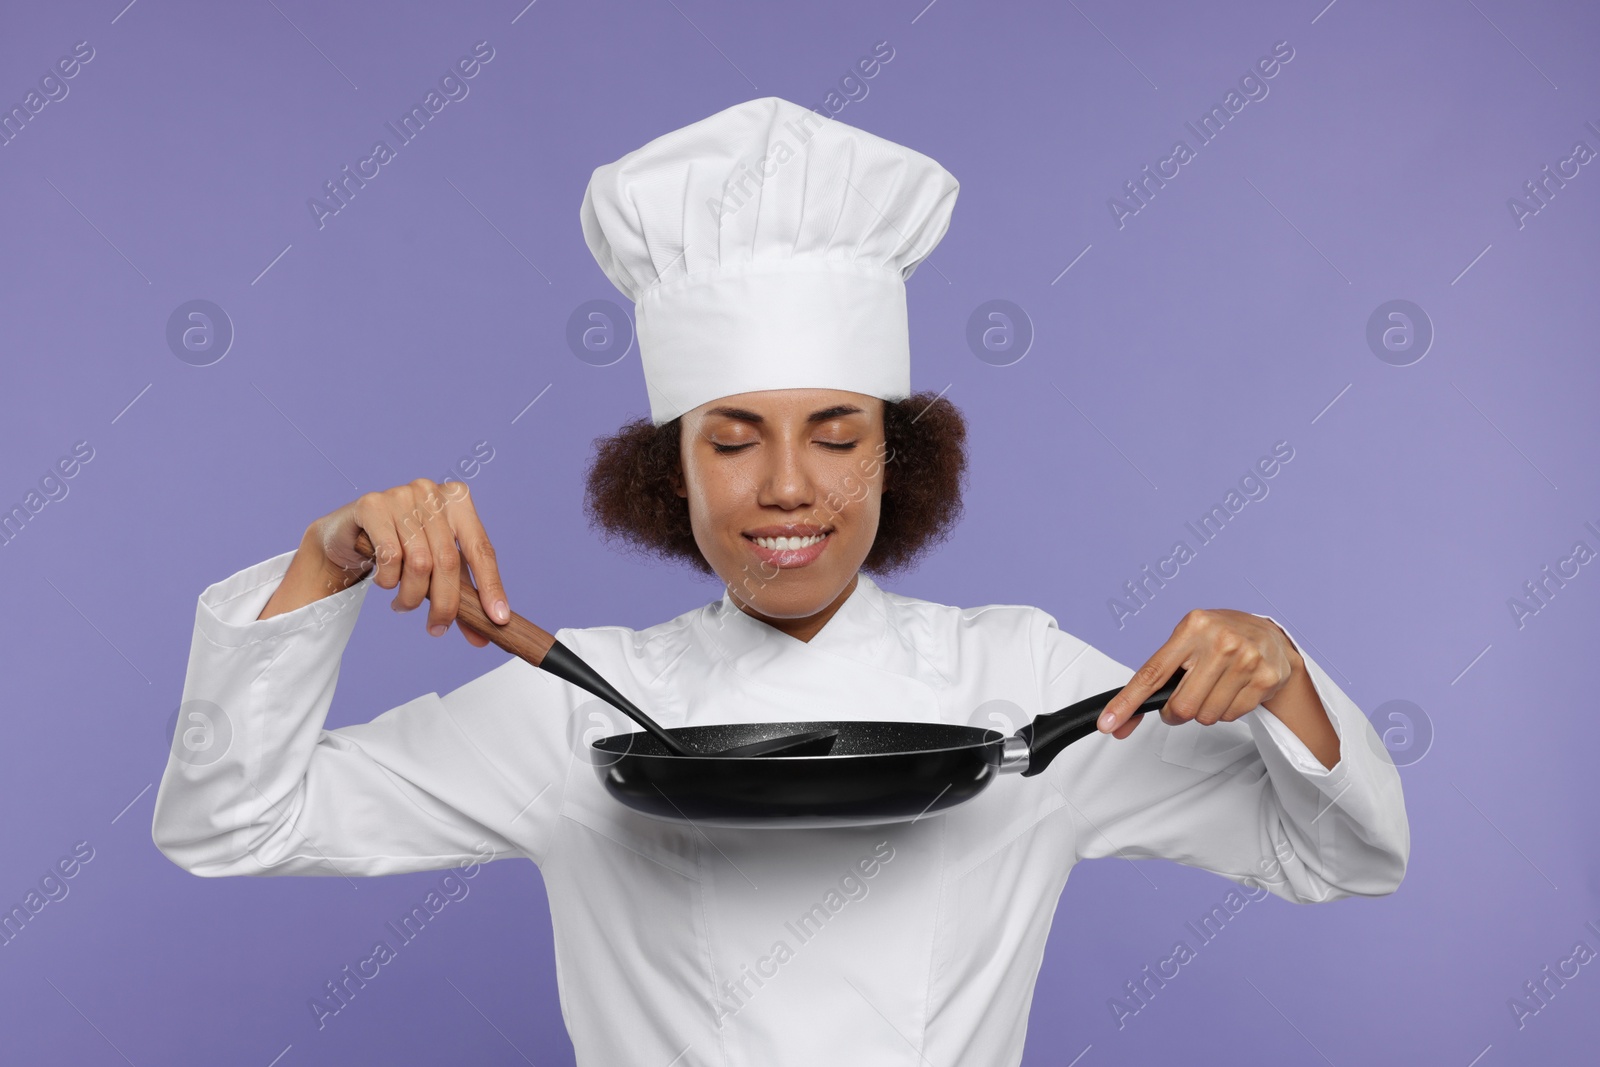 Photo of Happy female chef in uniform holding frying pan and ladle on purple background